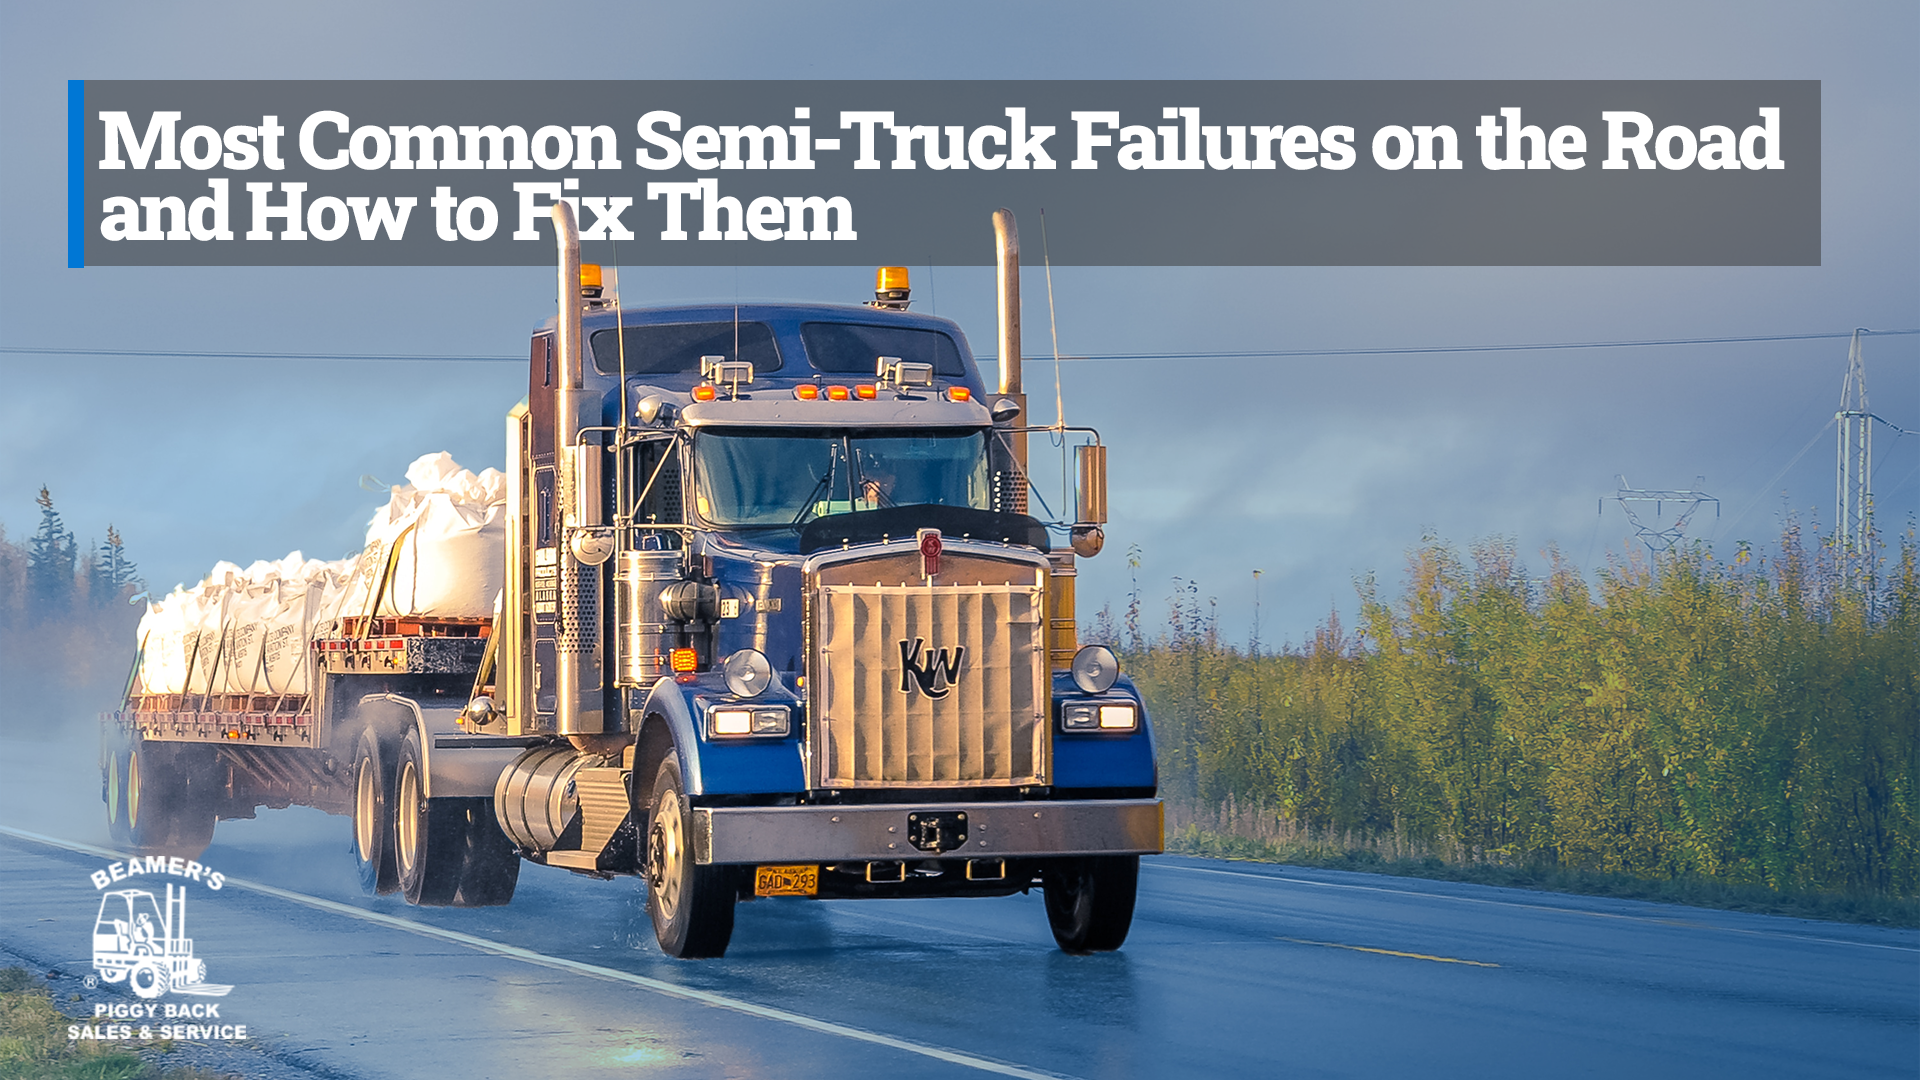 A blue semi-truck on the road with the text "Most Common Semi-Truck Failures on the Road and How to Fix Them"